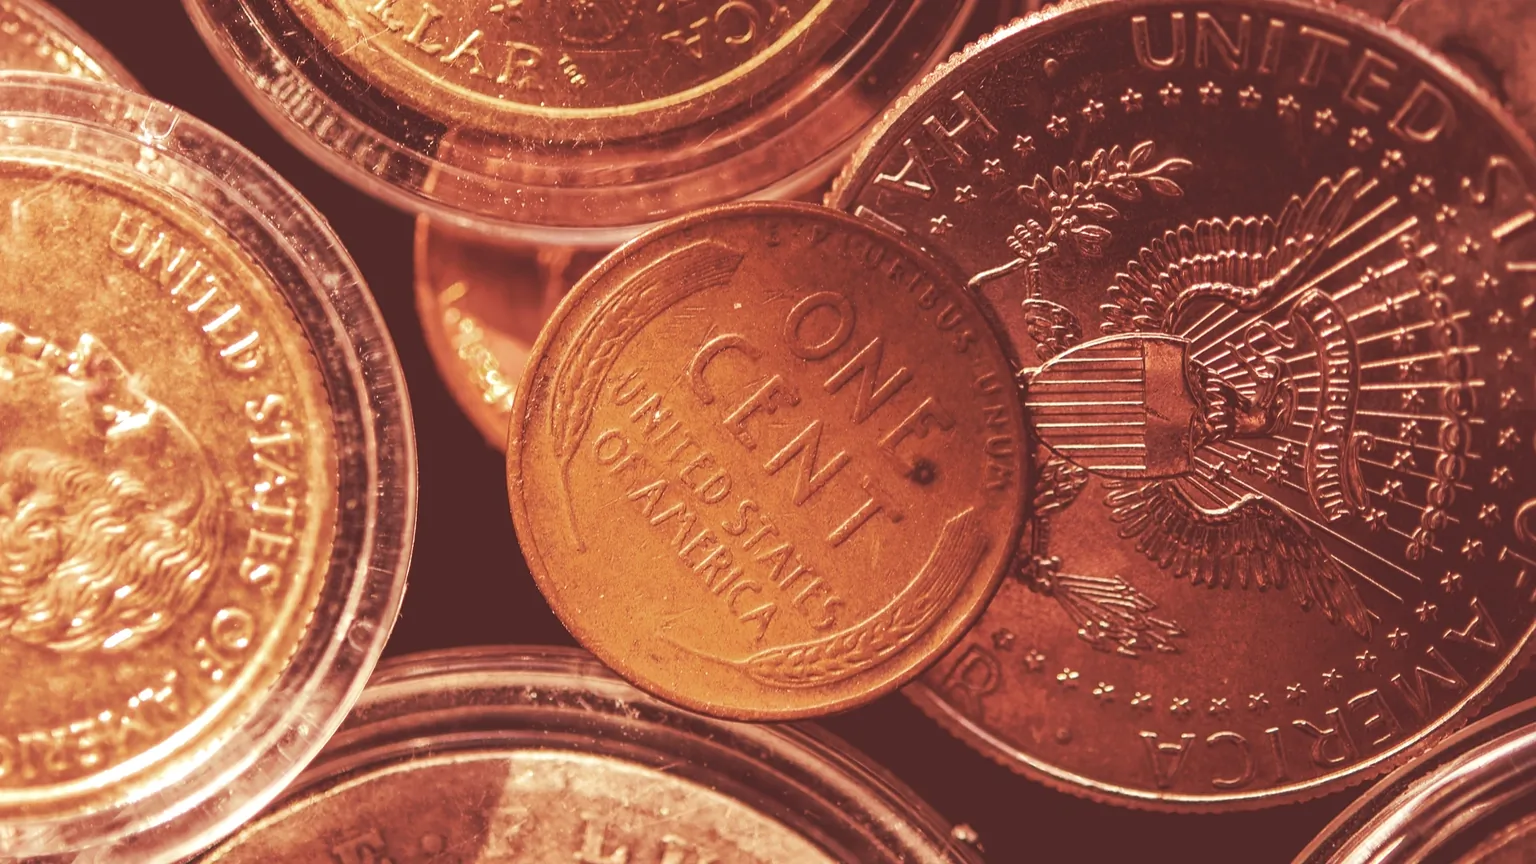 America's coin shortage is paving the way for a Digital Dollar. (Image: Shutterstock)